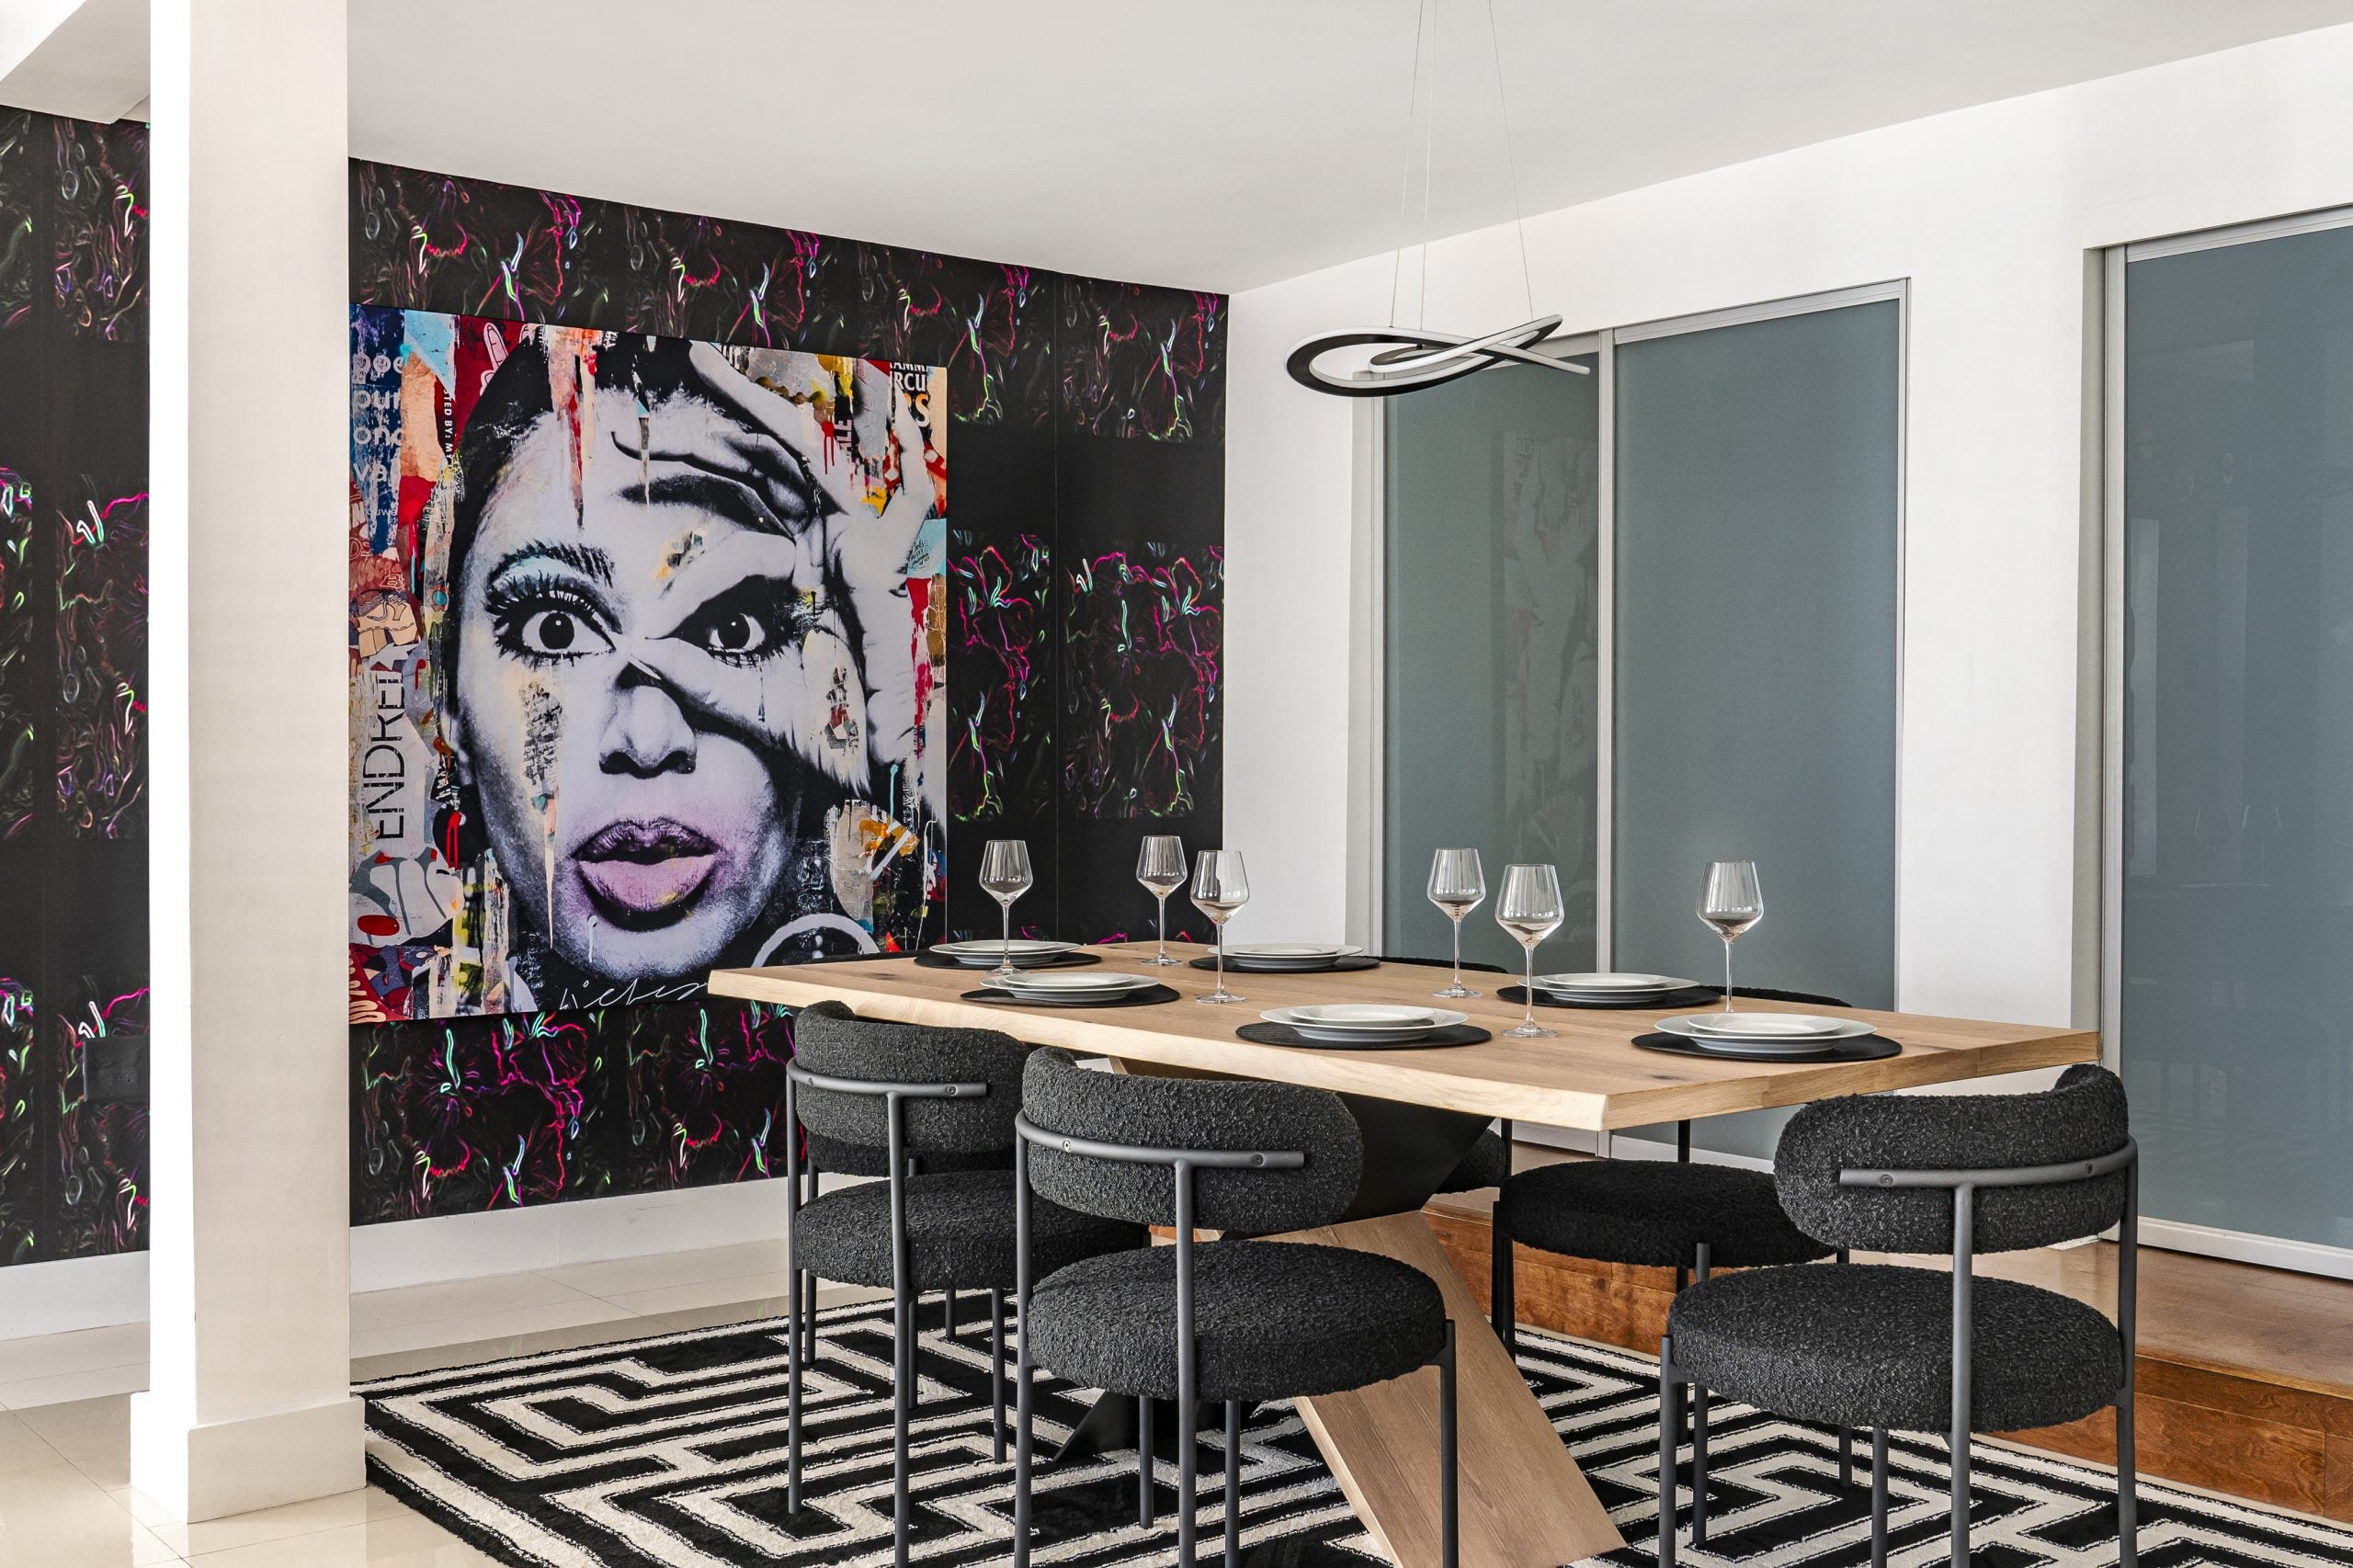 Living In La la Land: Inside The Colorful Fort Lauderdale Airbnb Property Inspired By La La Anthony